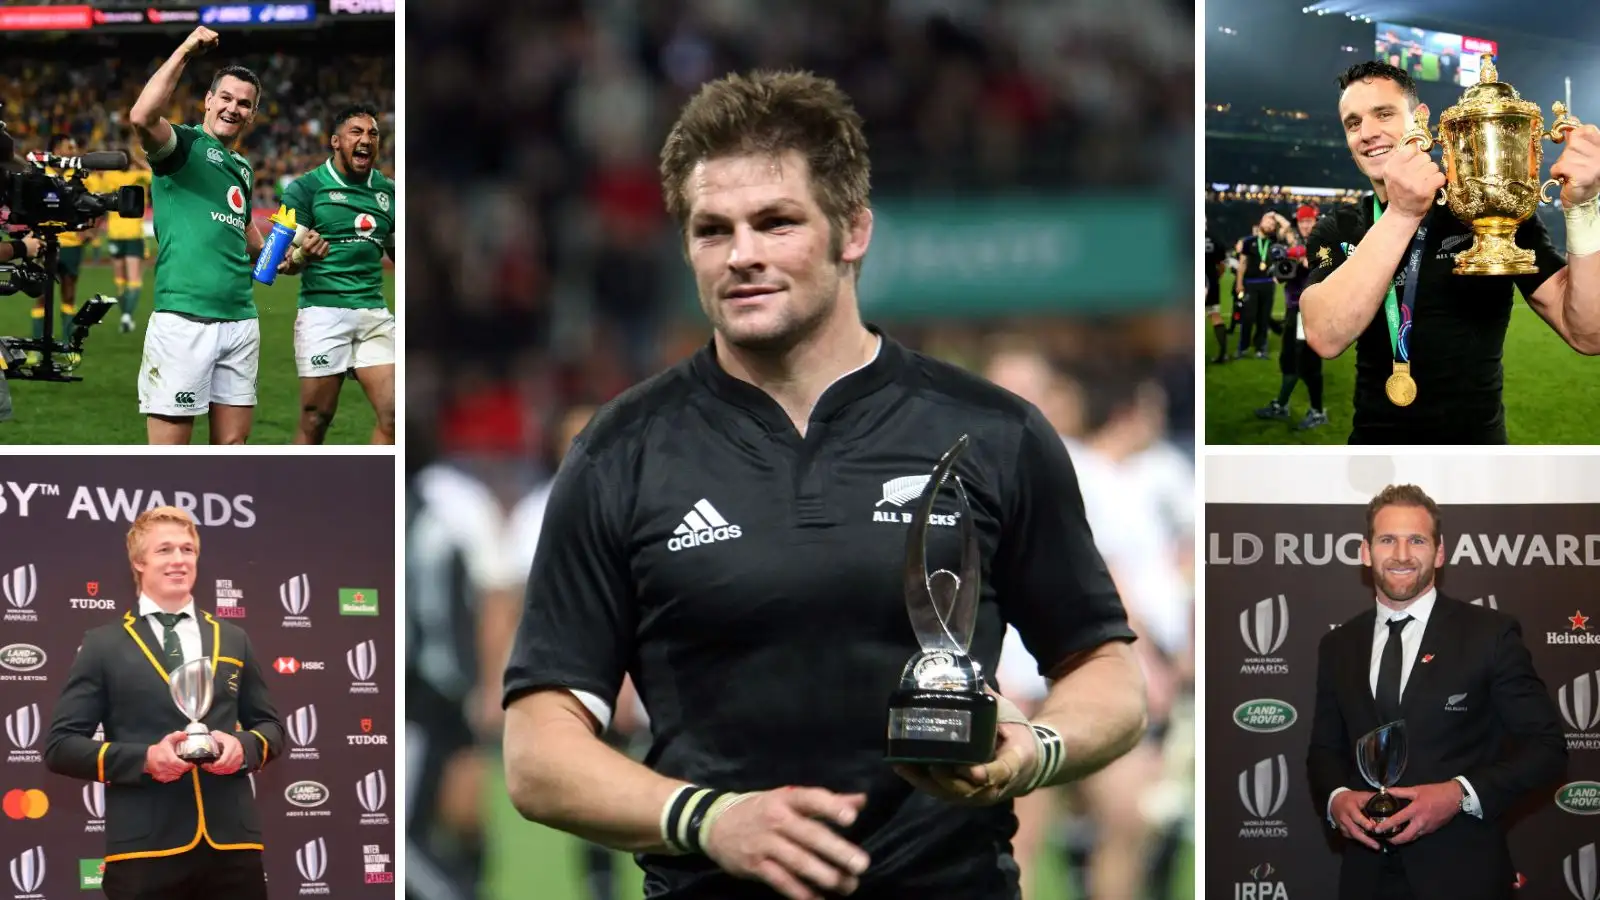 World Rugby Player of the Year Award winners Ireland's Johnny Sexton, South Africa's Pieter-Steph du Toit, New Zealand's Richie McCaw, New Zealand's Dan Carter and All Blacks number eight Kieran Read.